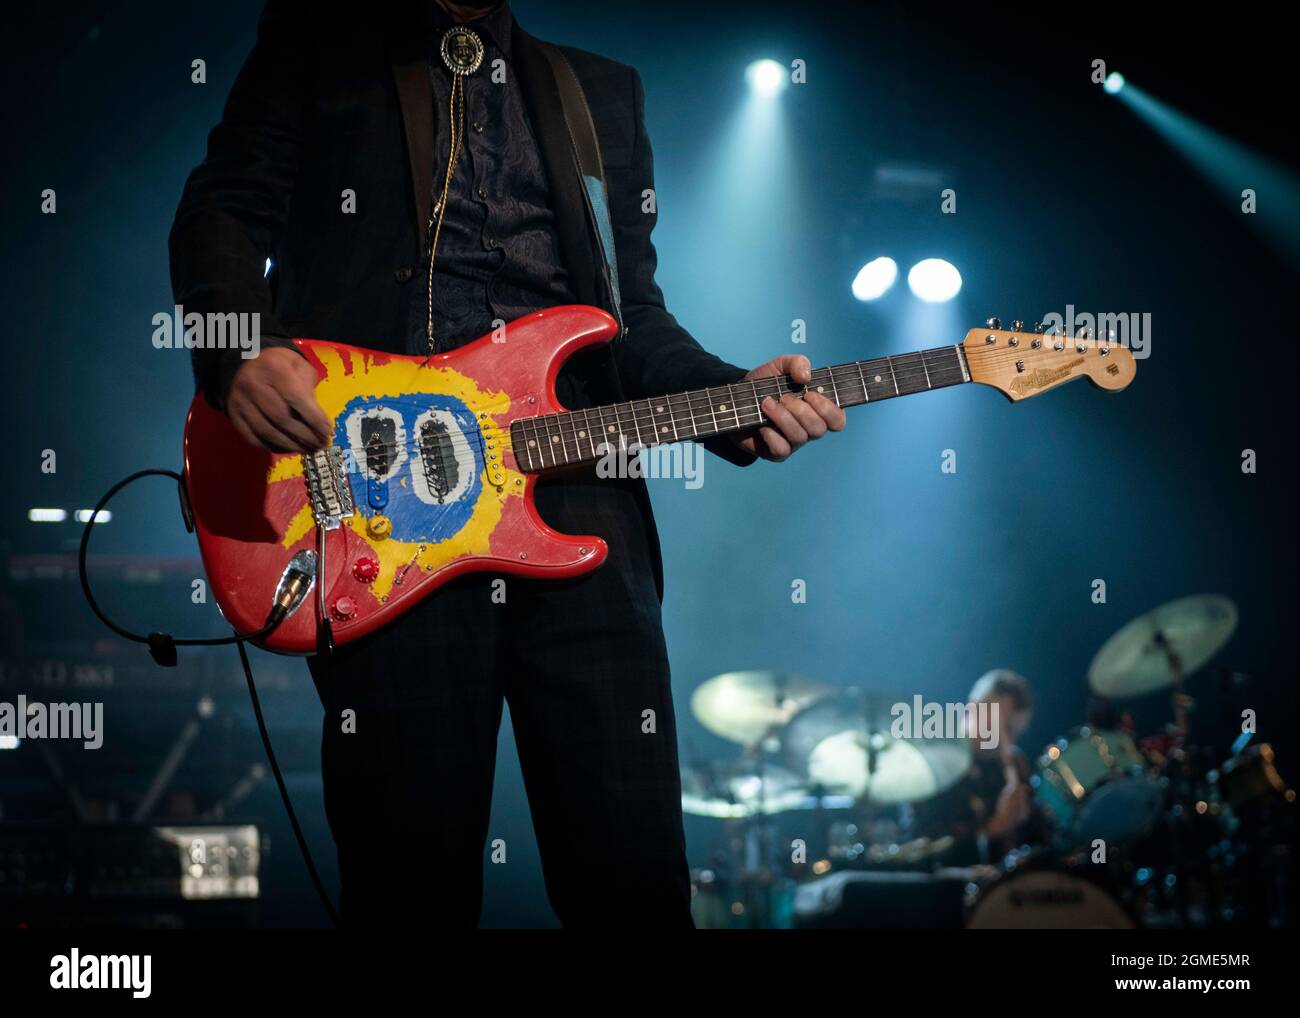 Newport, Isle of Wight, UK, Friday, 17th September 2021 Screamadelica album cover art on a guitar during Primal Screams set live at the Isle of Wight festival Seaclose Park. Credit: DavidJensen / Empics Entertainment / Alamy Live News Stock Photo